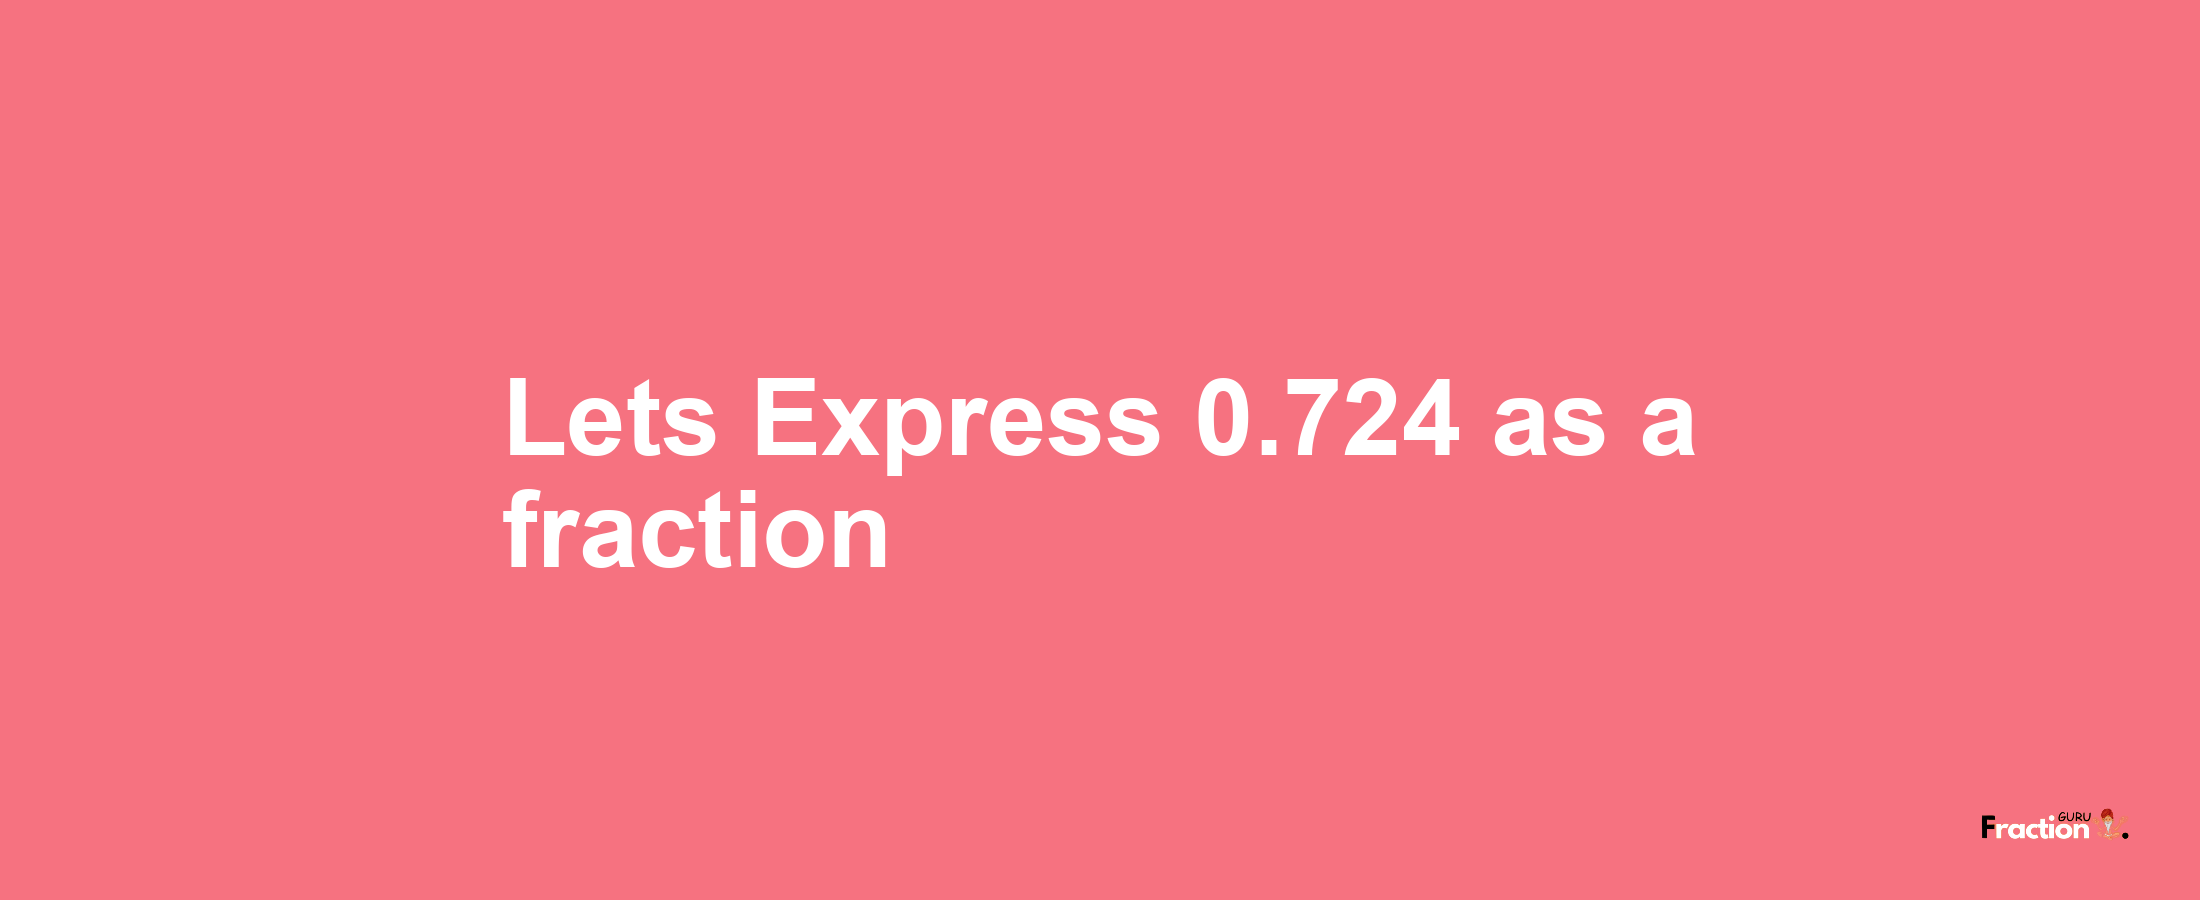 Lets Express 0.724 as afraction